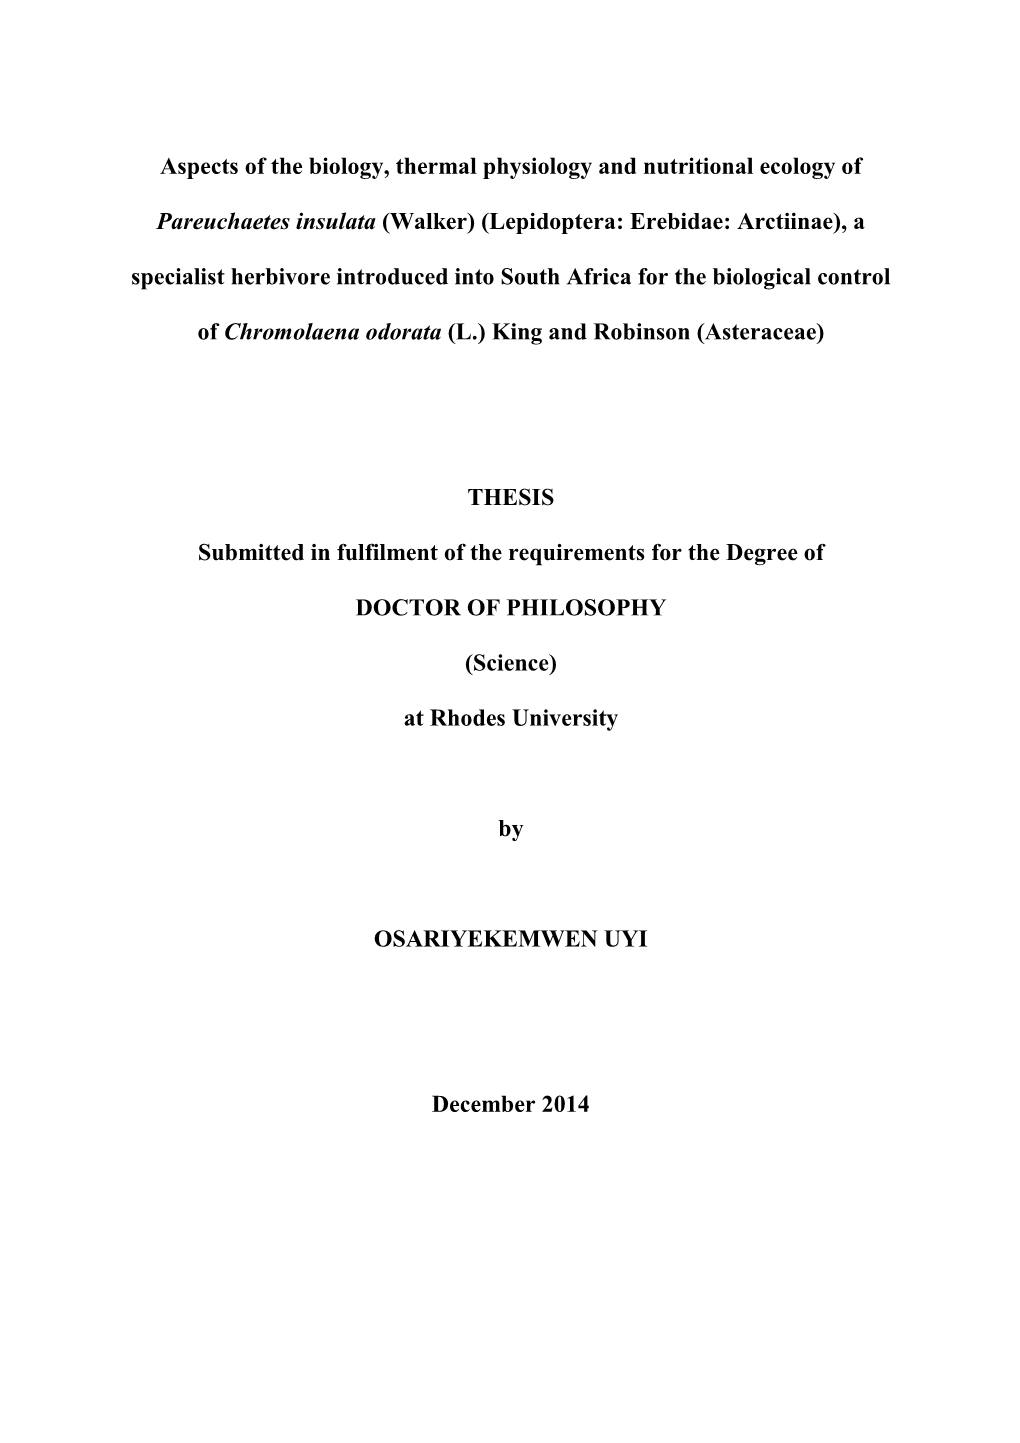 Phd Thesis Submitted to MH After Revision CZ Checked FINAL